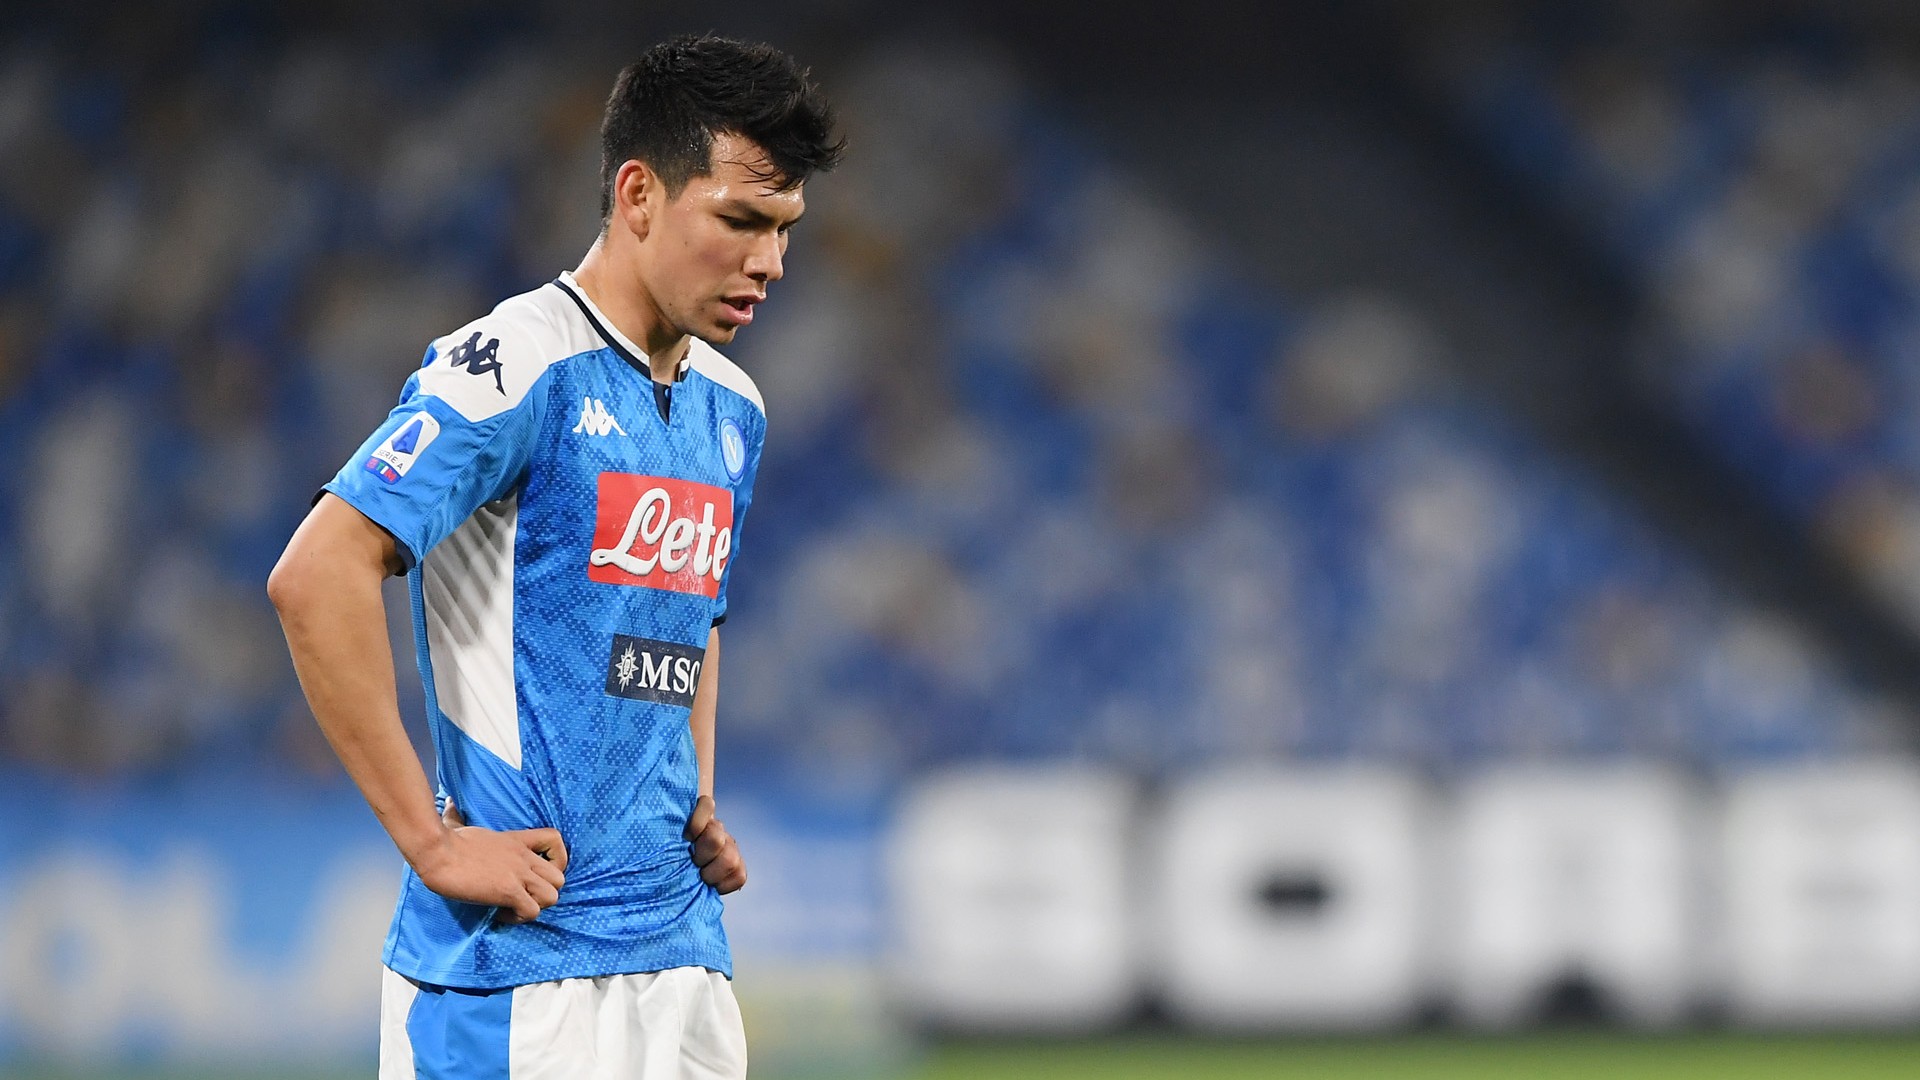 What now for Chucky? Lozano's dream move to Napoli has become a nightmare